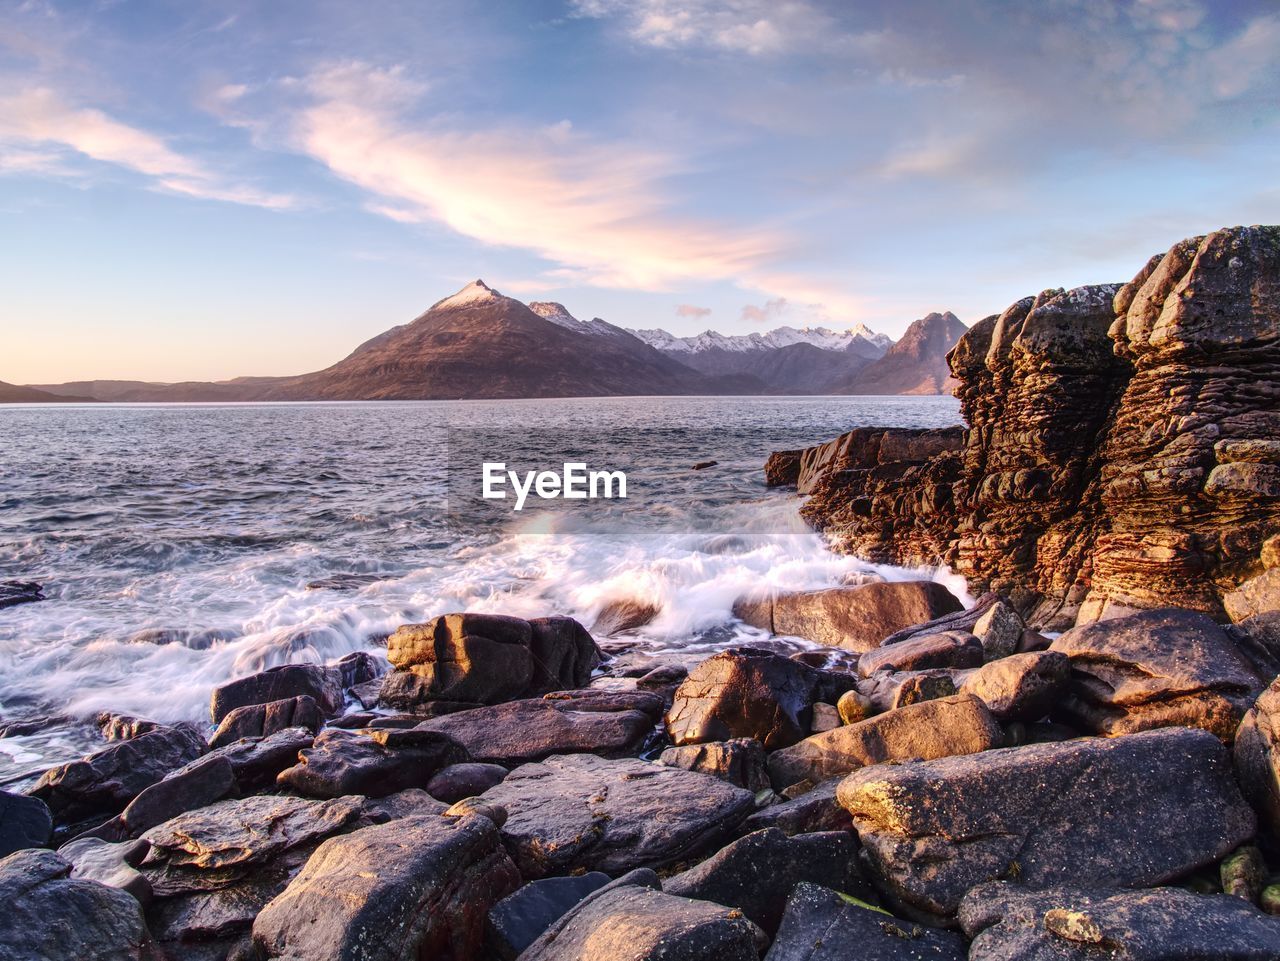 The famous rocky bay of elgol on the isle of skye, scotland. the cuillins mountain in the background